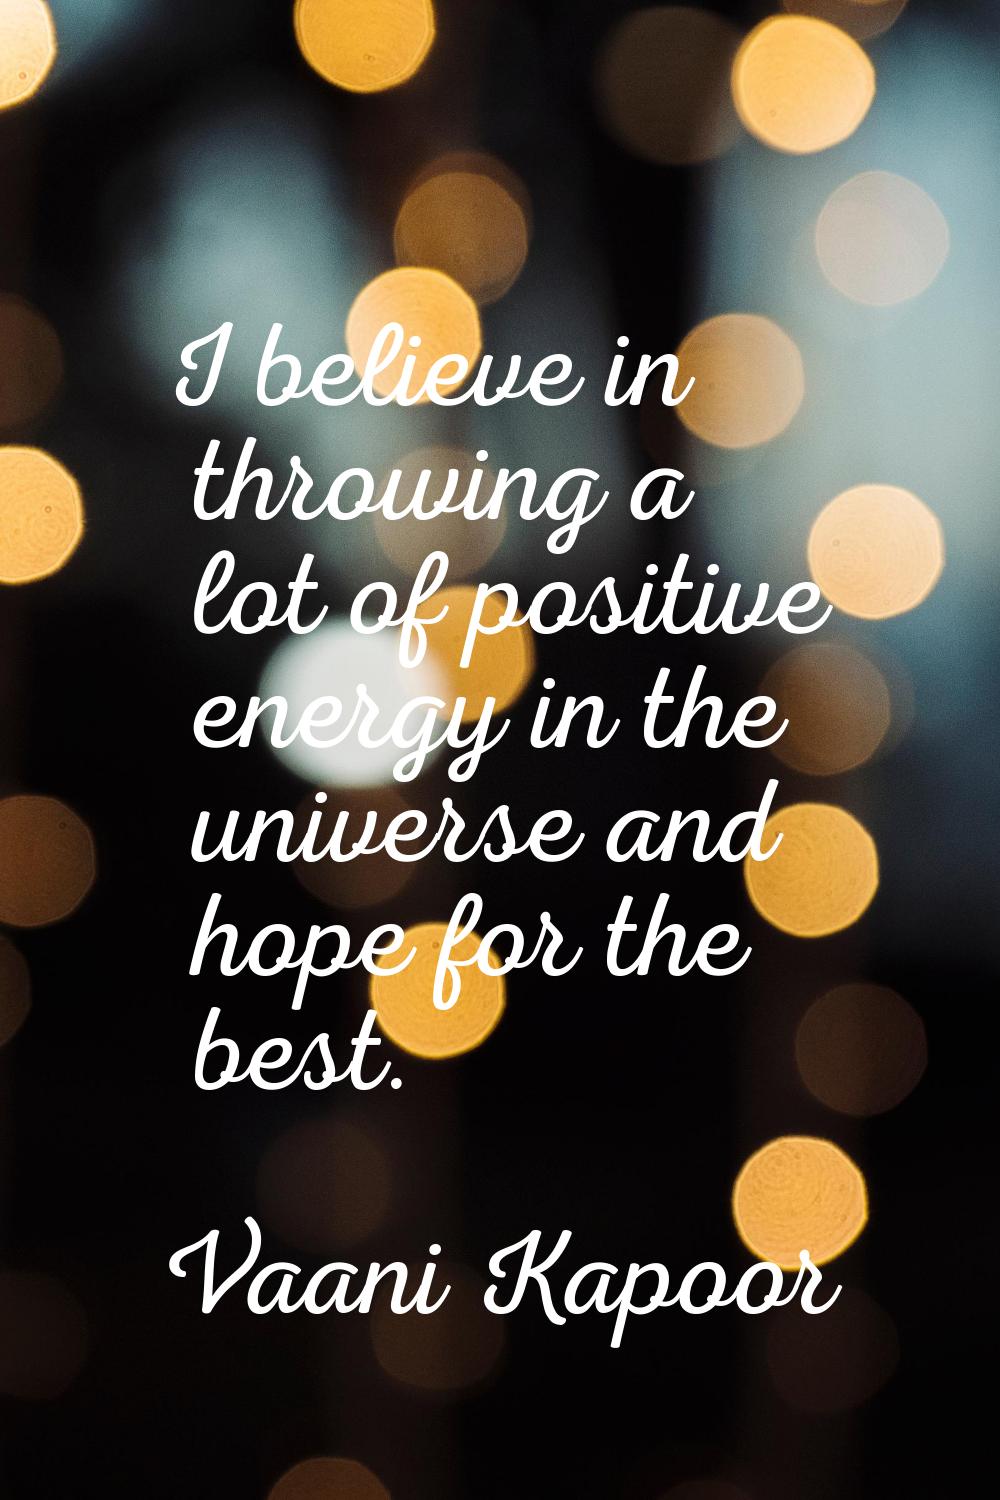 I believe in throwing a lot of positive energy in the universe and hope for the best.